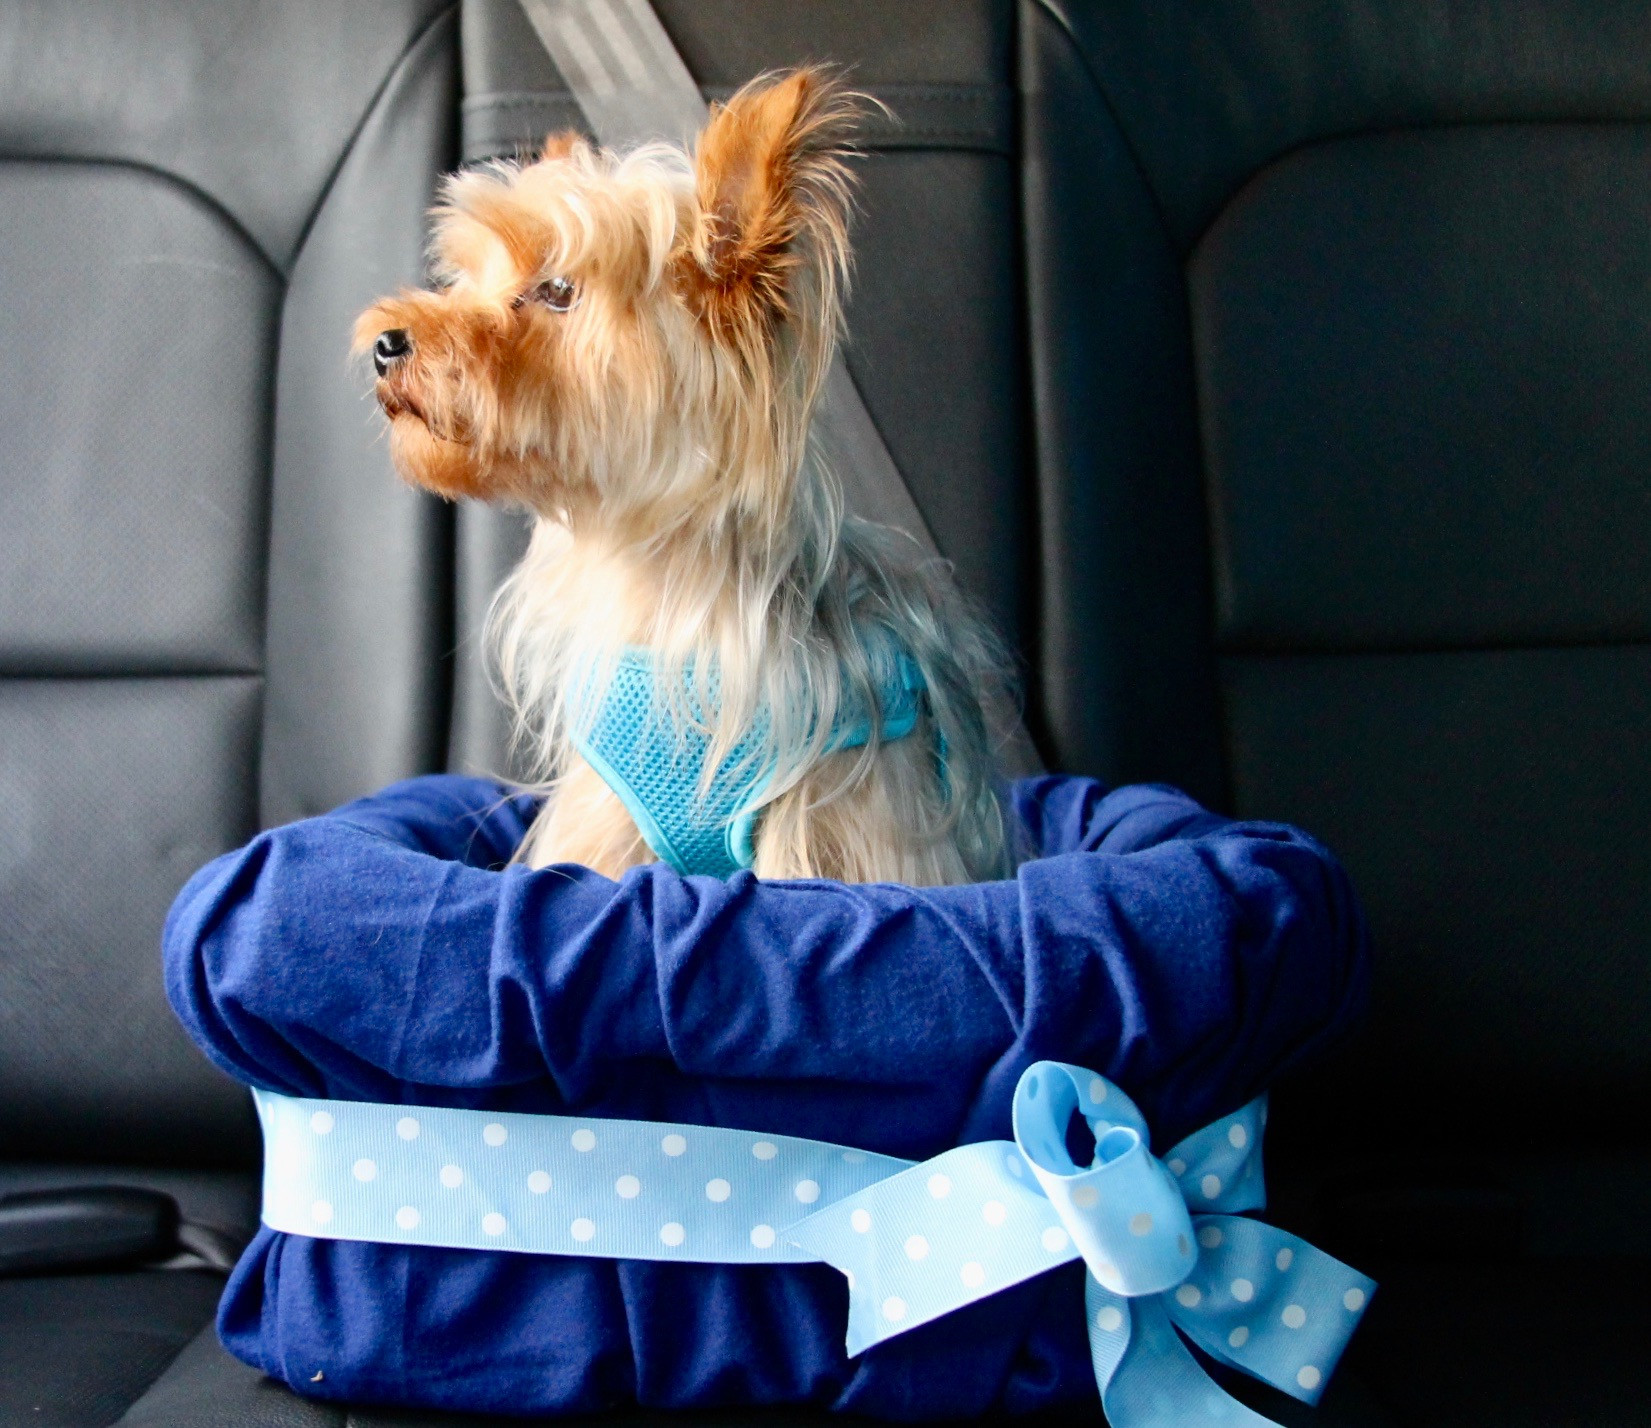 DIY Dog Car Booster Seat
 No Sew DIY Car Booster Seat For Your Dog Growing Up